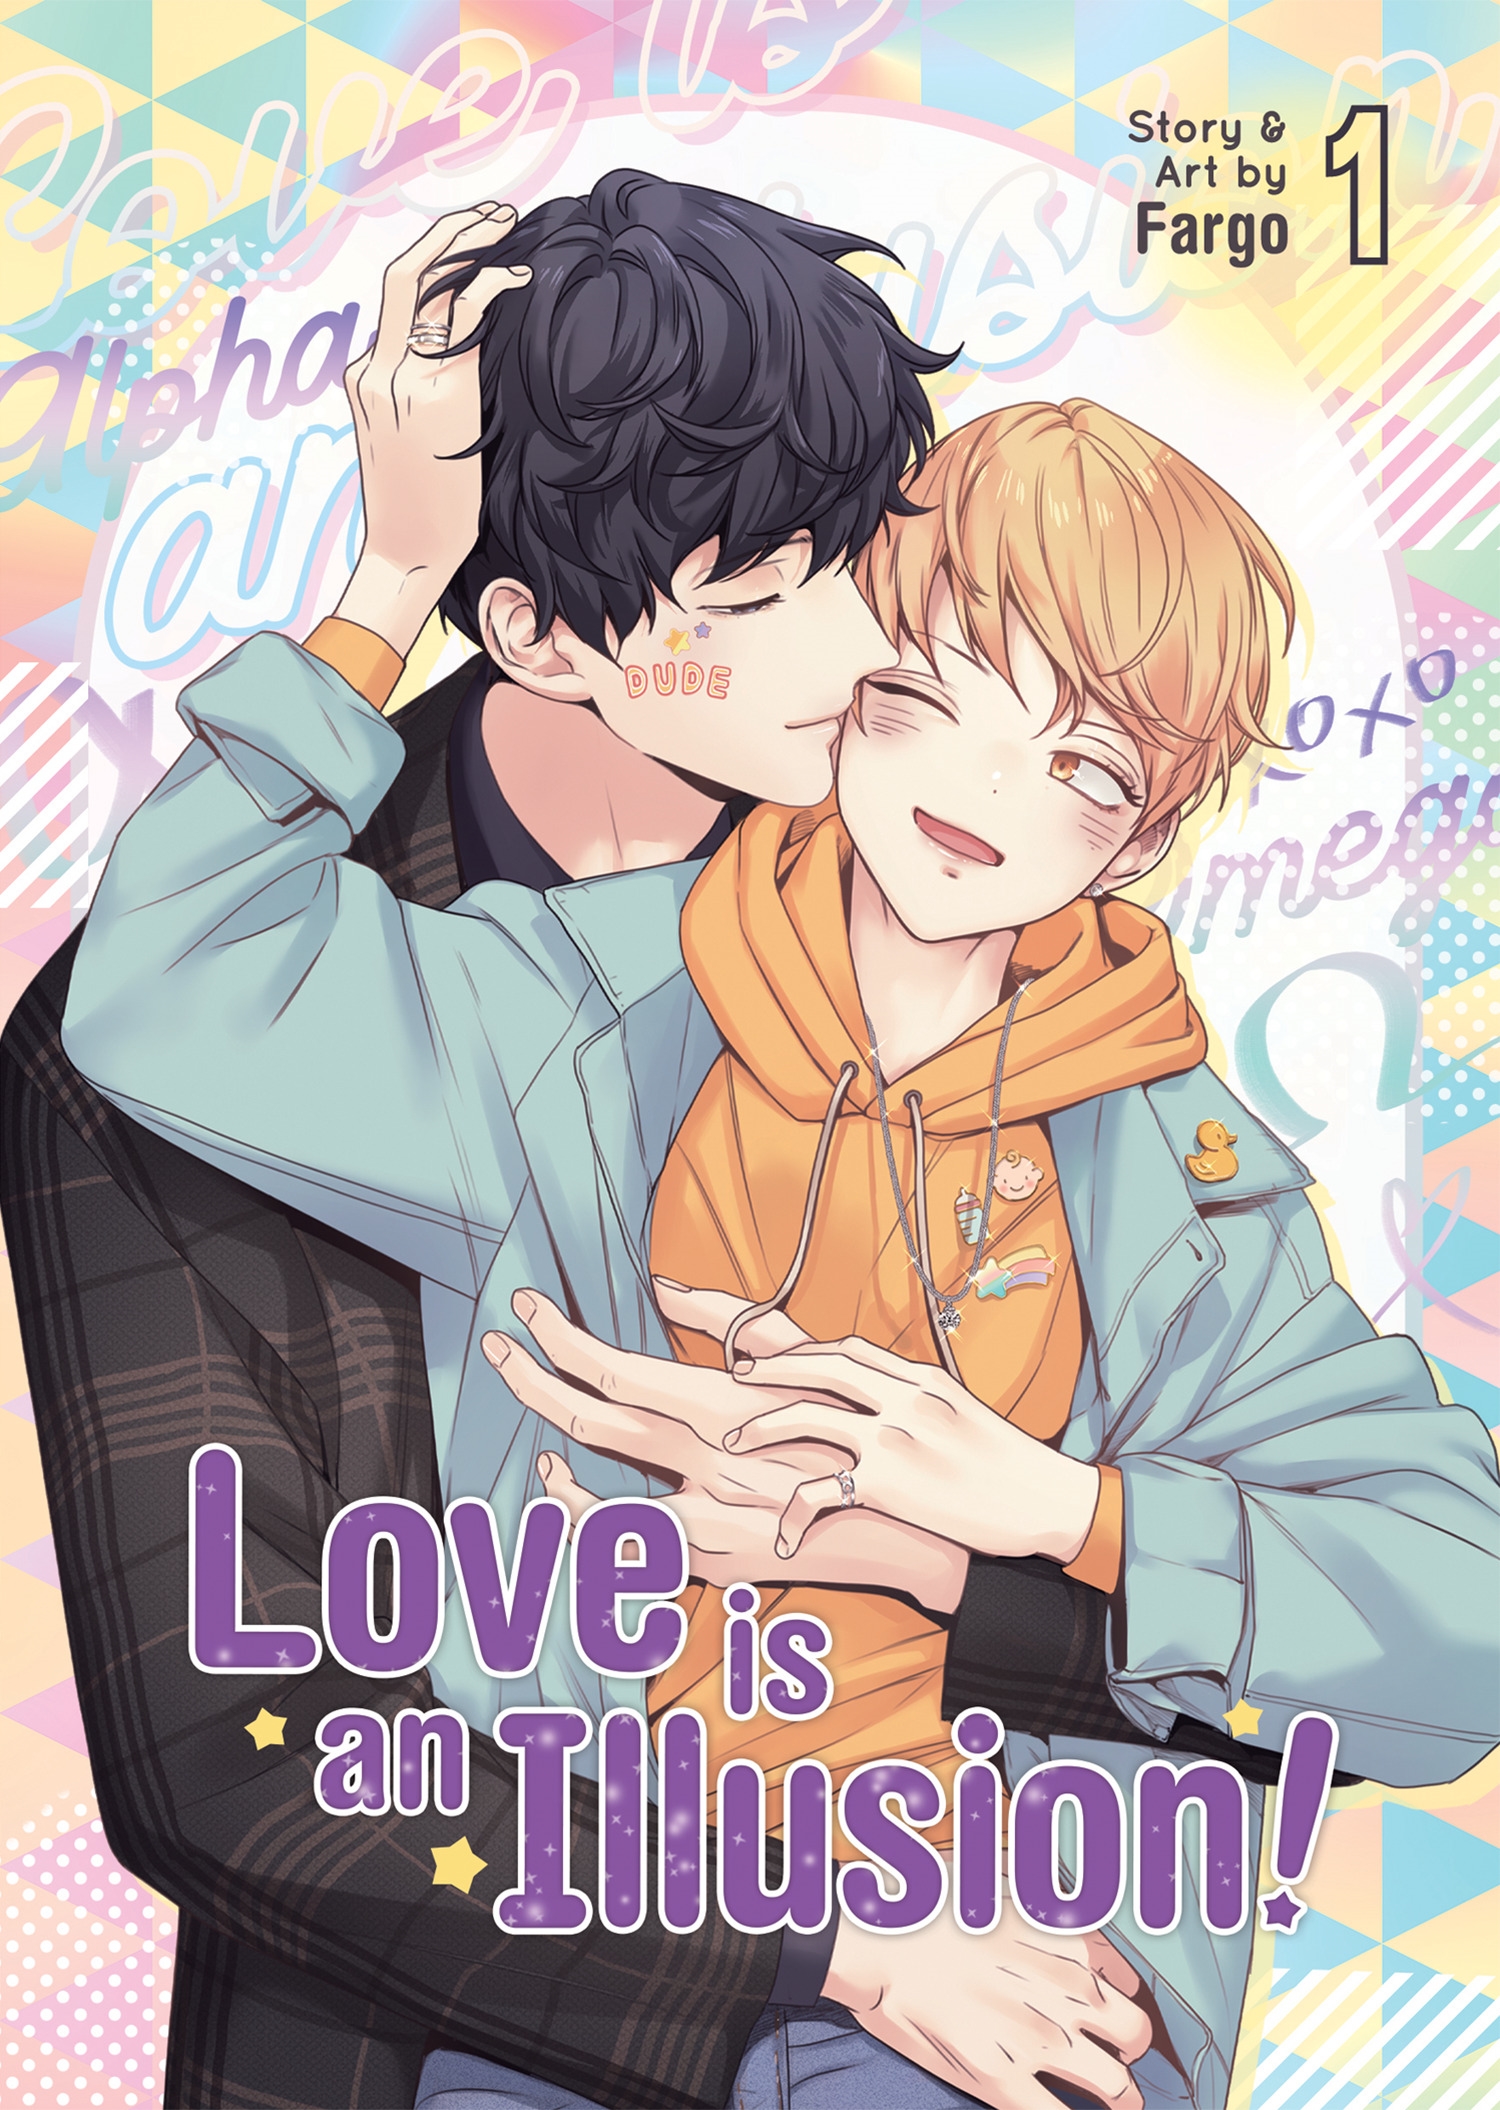 Love Is An Illusion Ch1 Love is an Illusion! Vol. 1 by Fargo - Penguin Books New Zealand